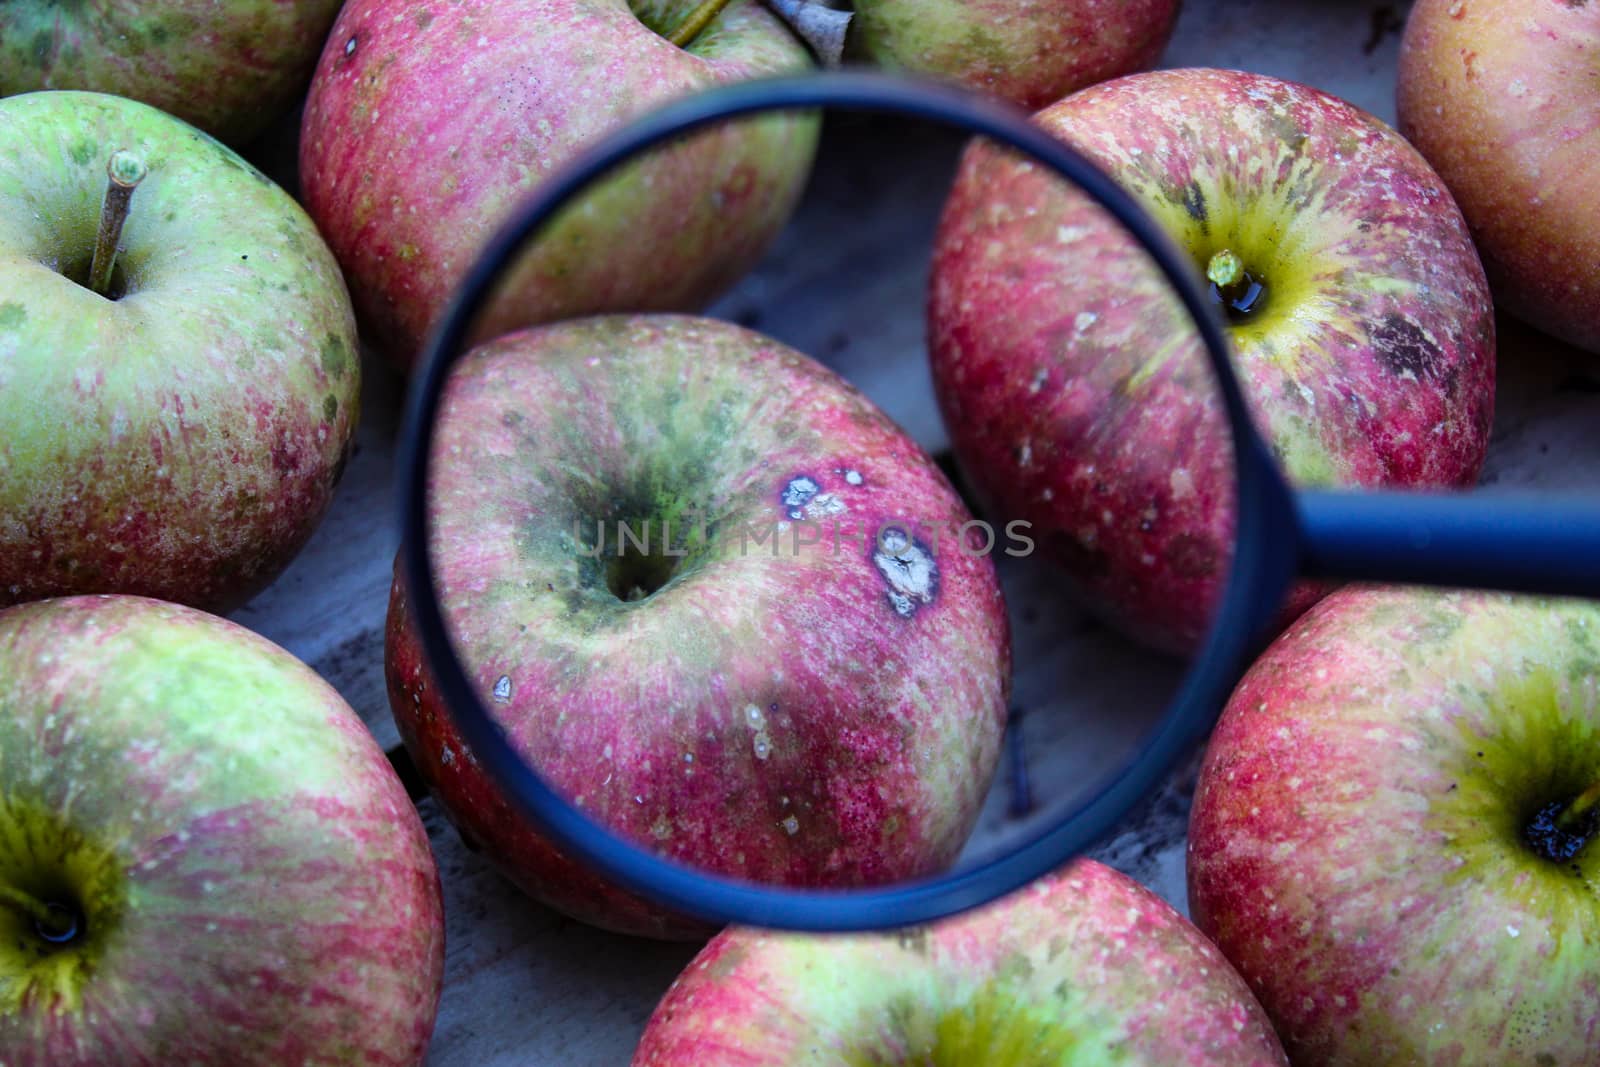 One apple magnified with a magnifying glass compared to the others in the crate where the other apples are stacked. Bitter pit is a disorder in apple fruits, now believed to be induced by calcium deficiency. by mahirrov